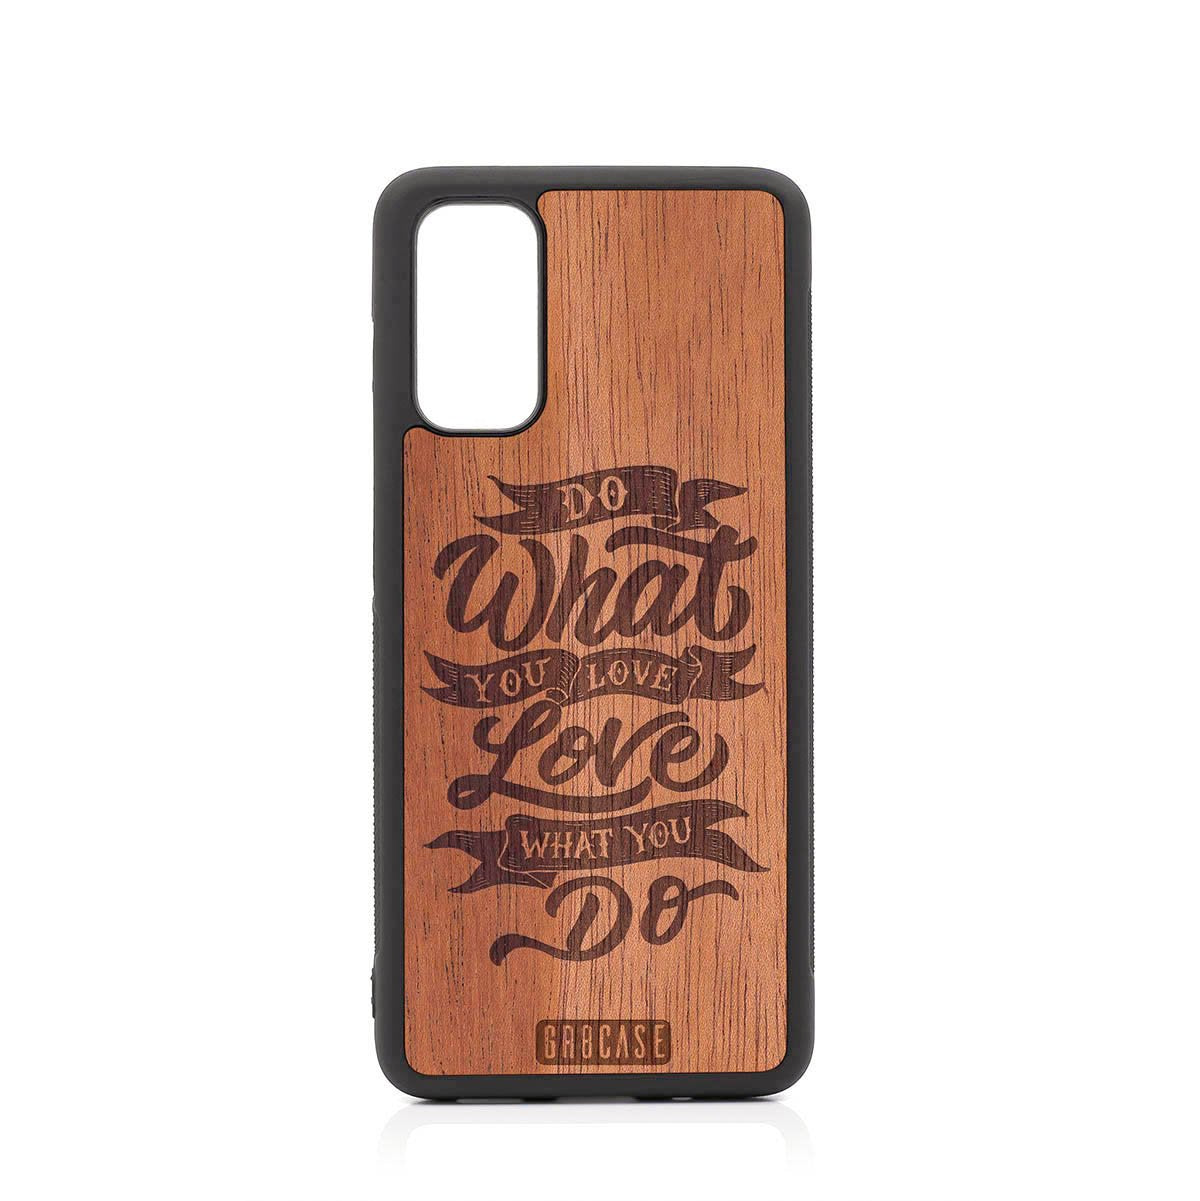 Do What You Love Love What You Do Design Wood Case For Samsung Galaxy S20 FE 5G by GR8CASE